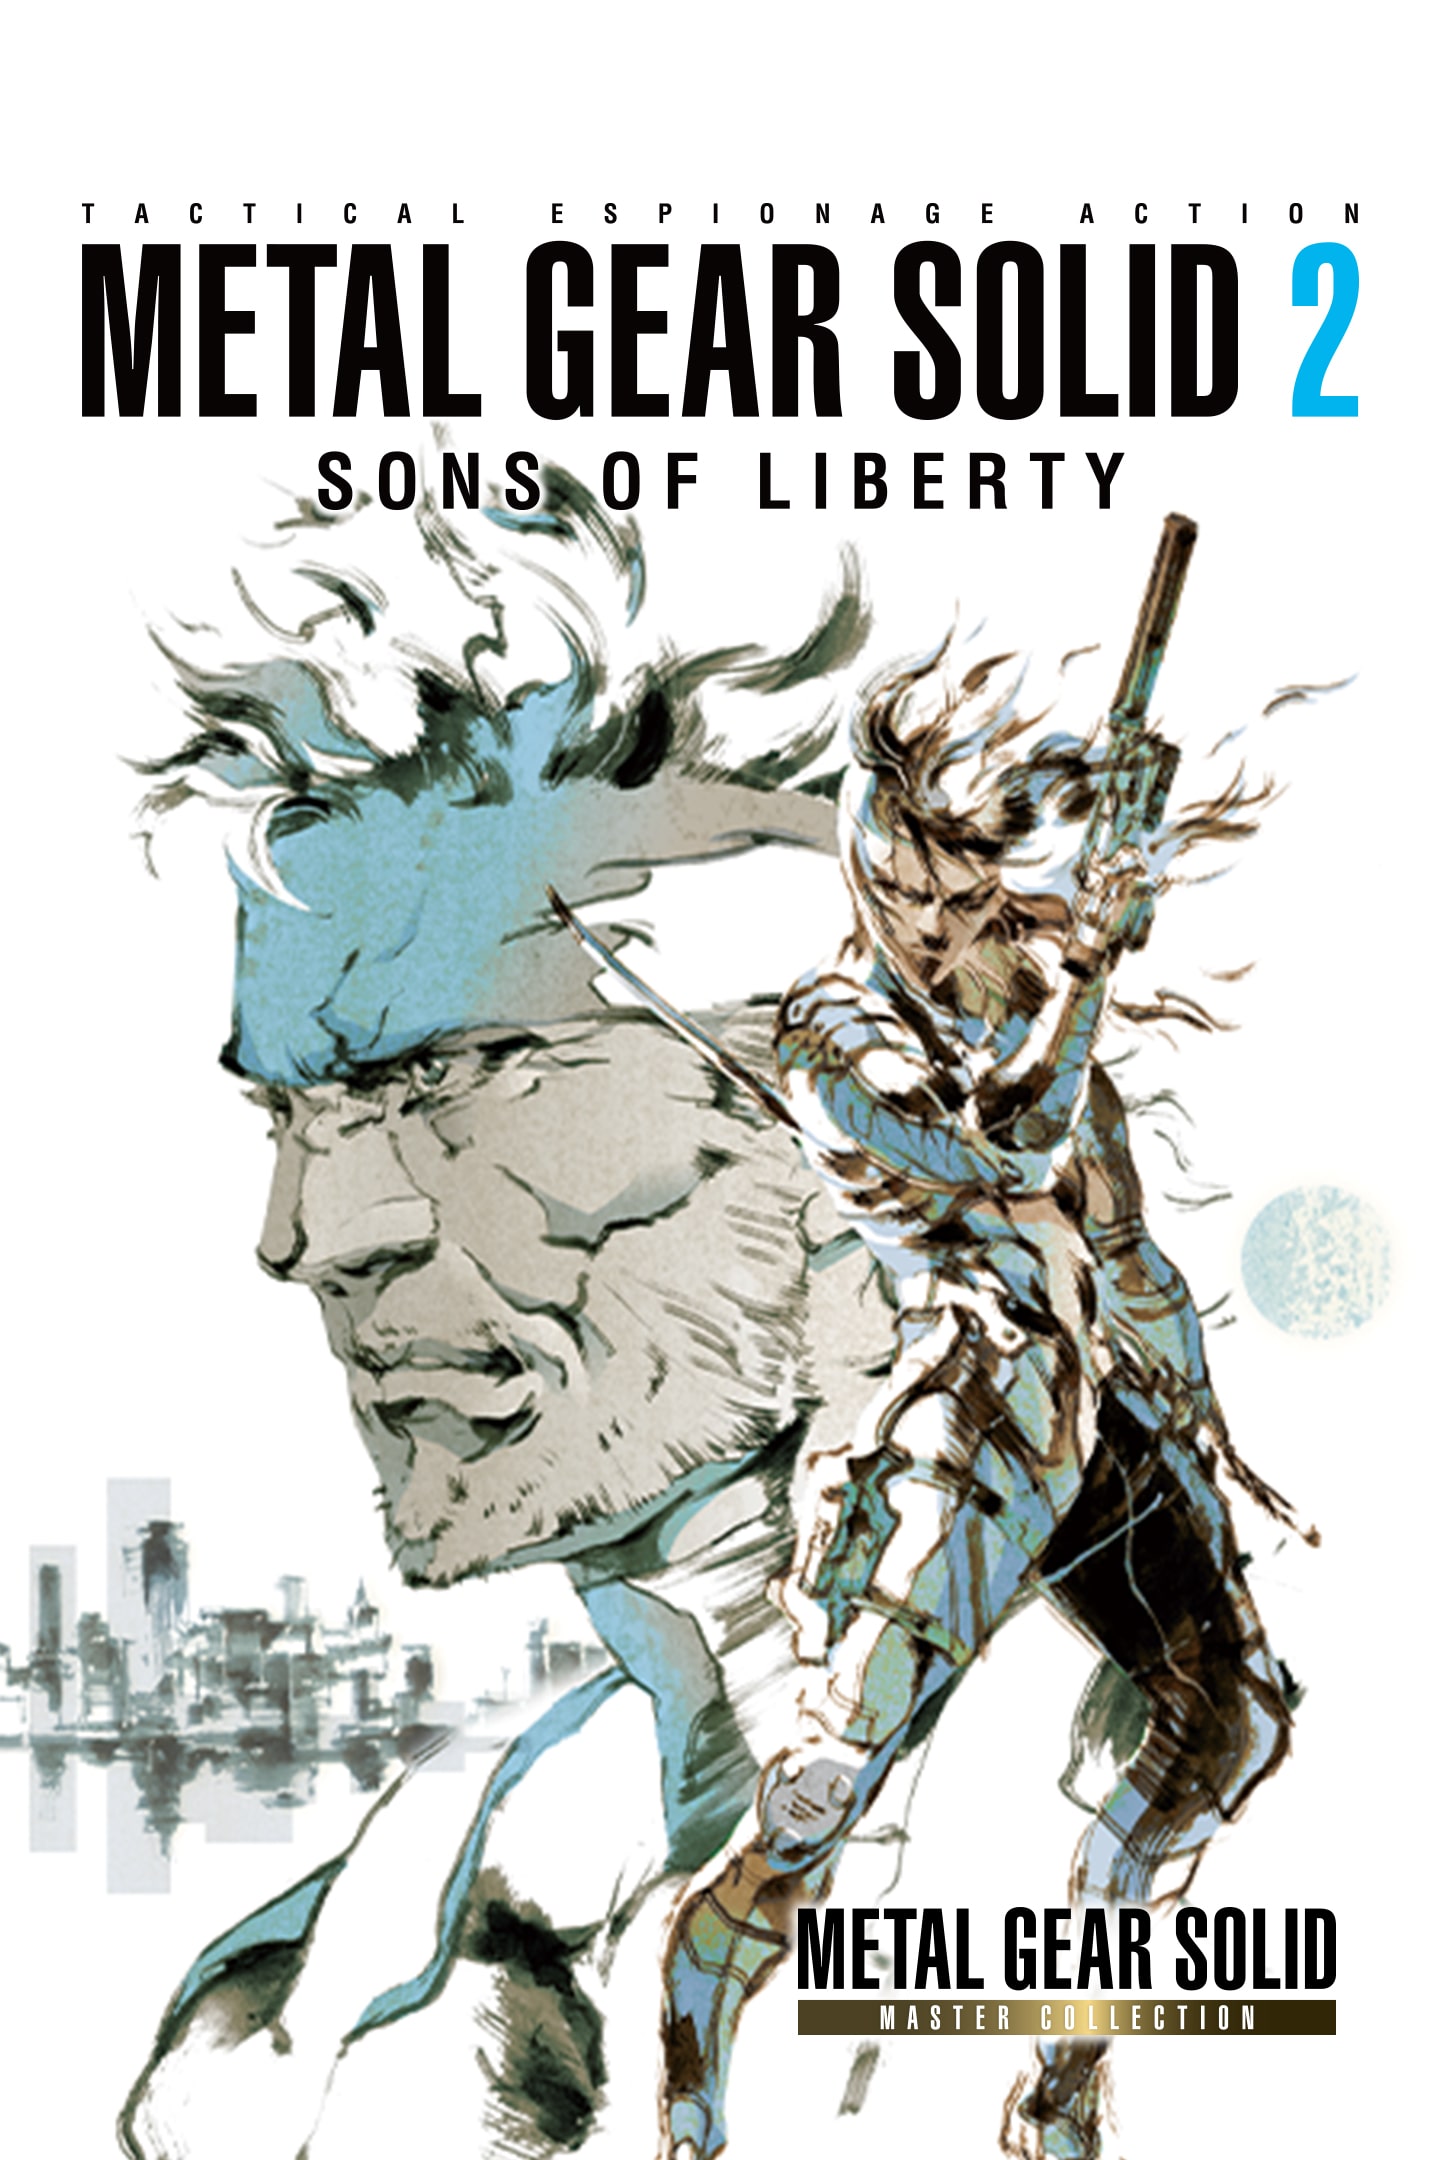 METAL GEAR SOLID 2: Sons of Liberty - Master Collection Version PS4 & PS5